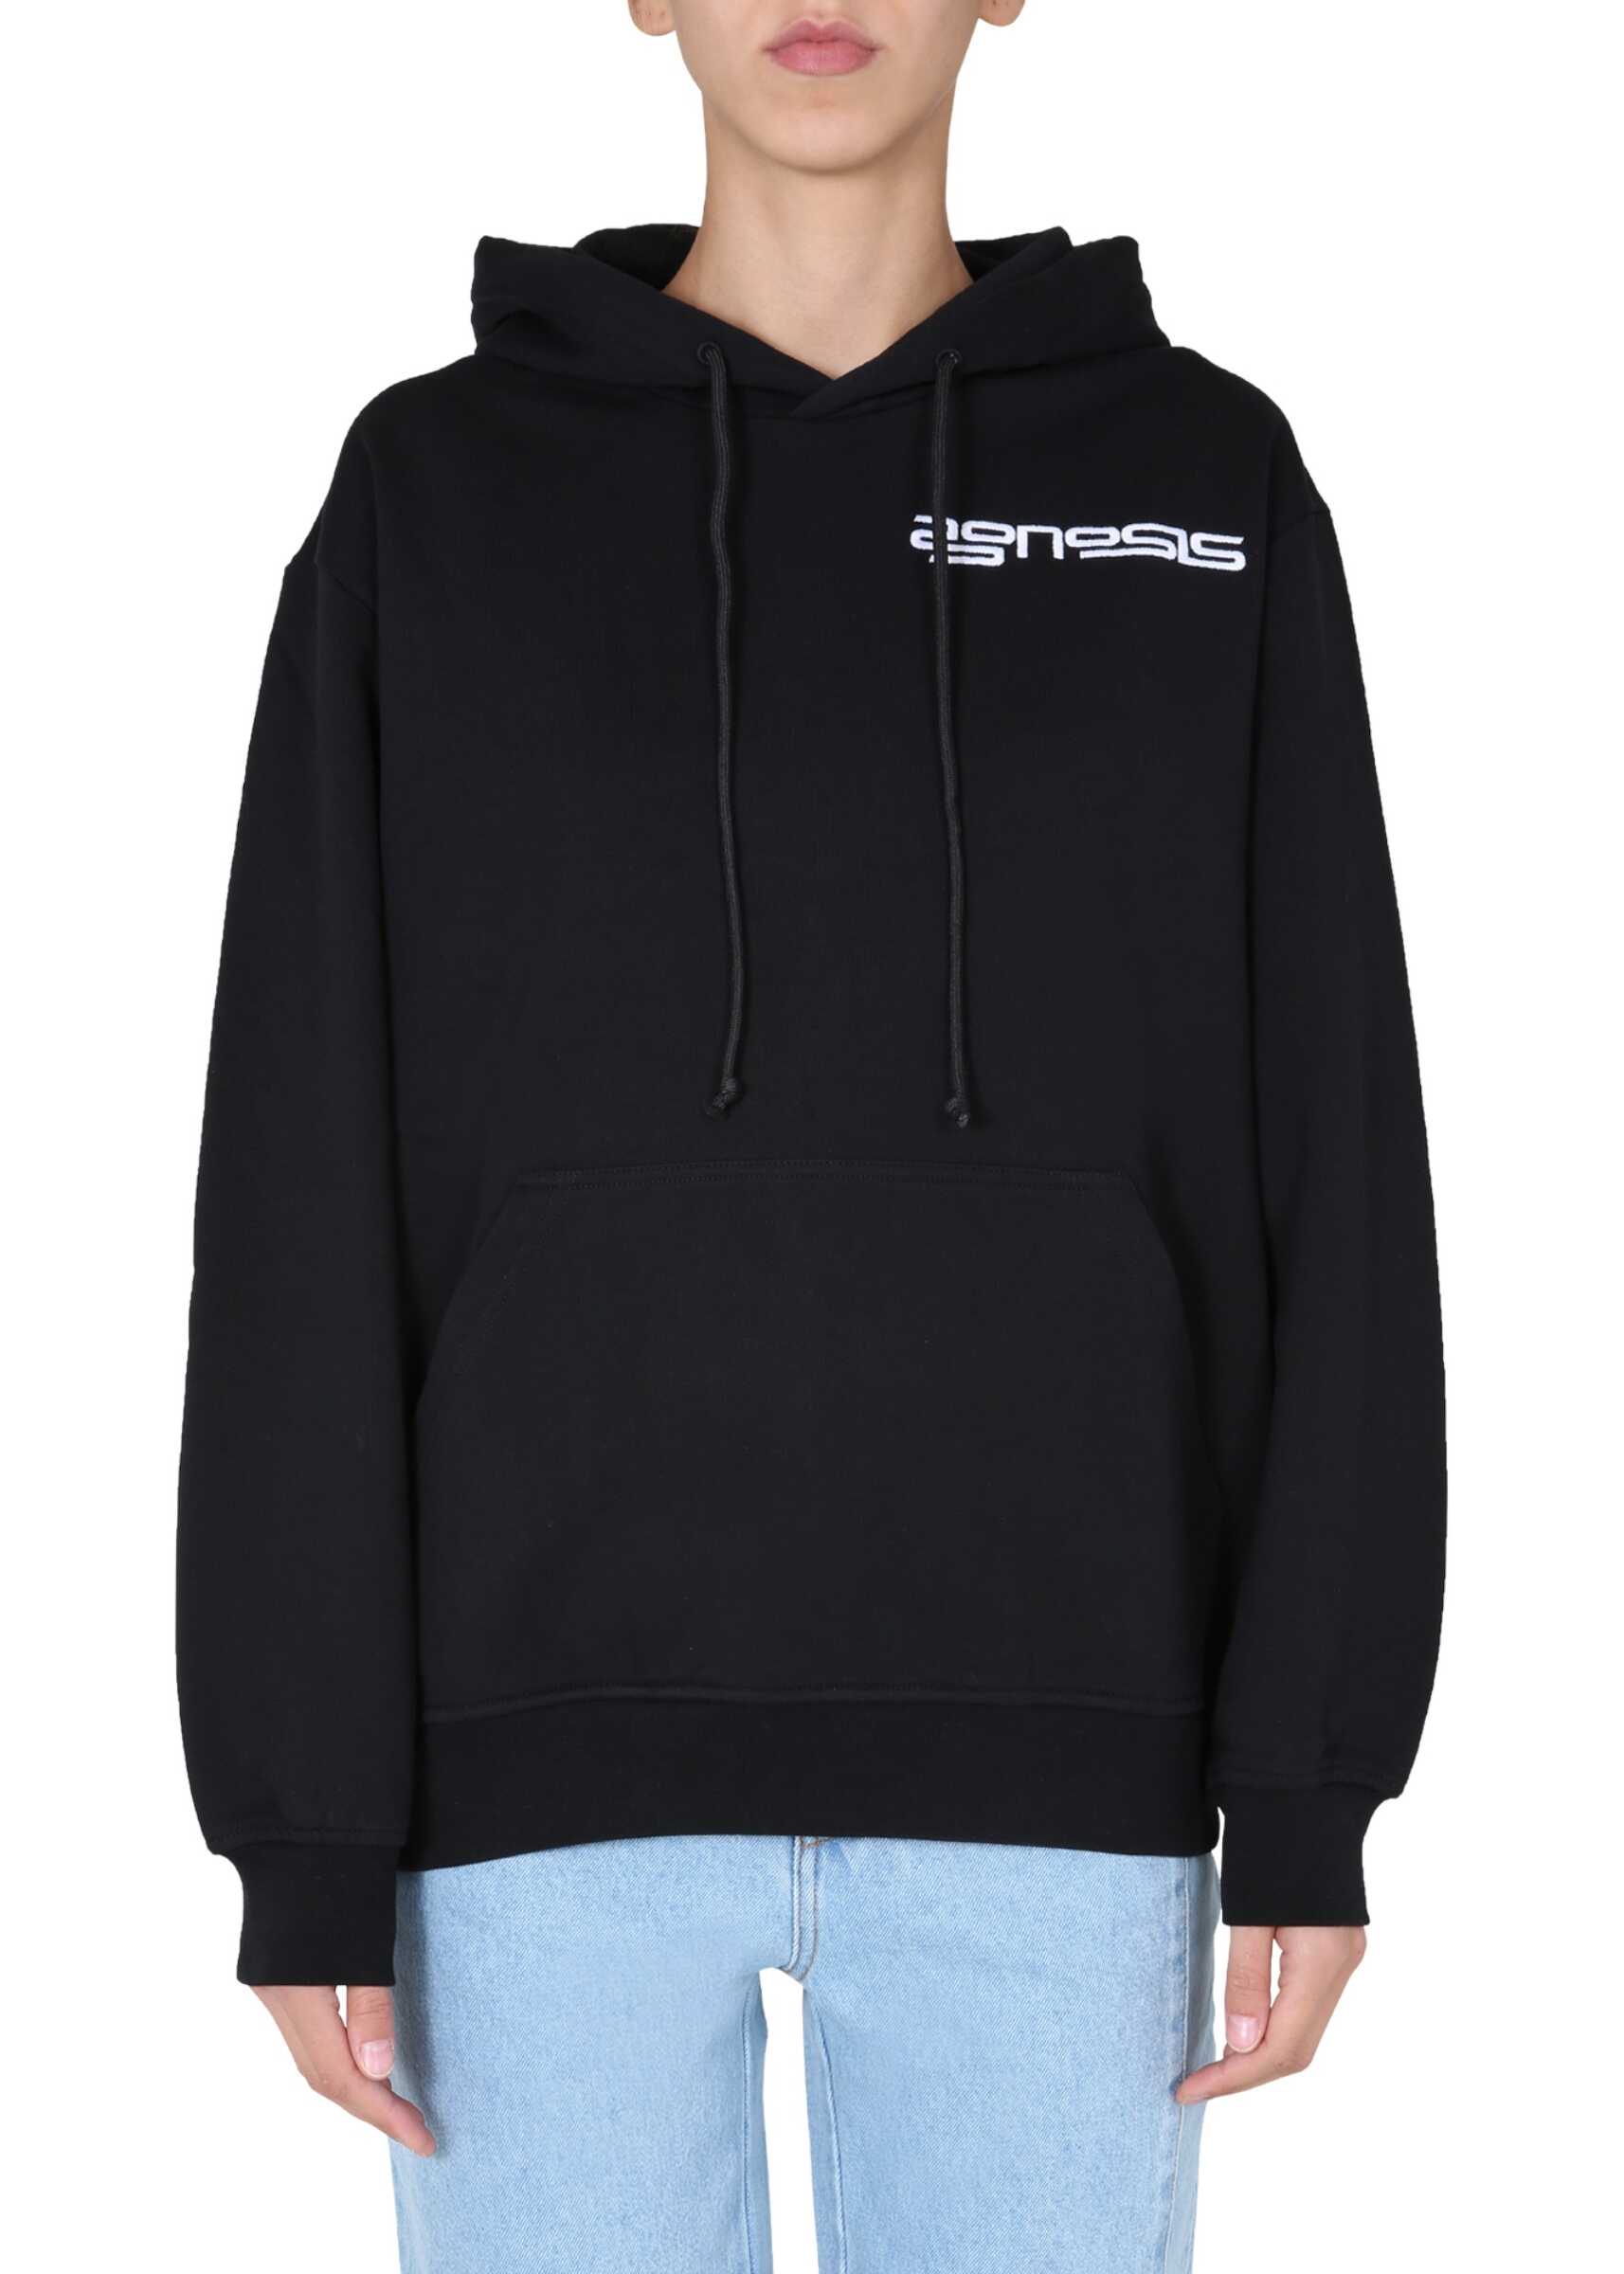 McQ Relaxed Fit Sweatshirt BLACK image2